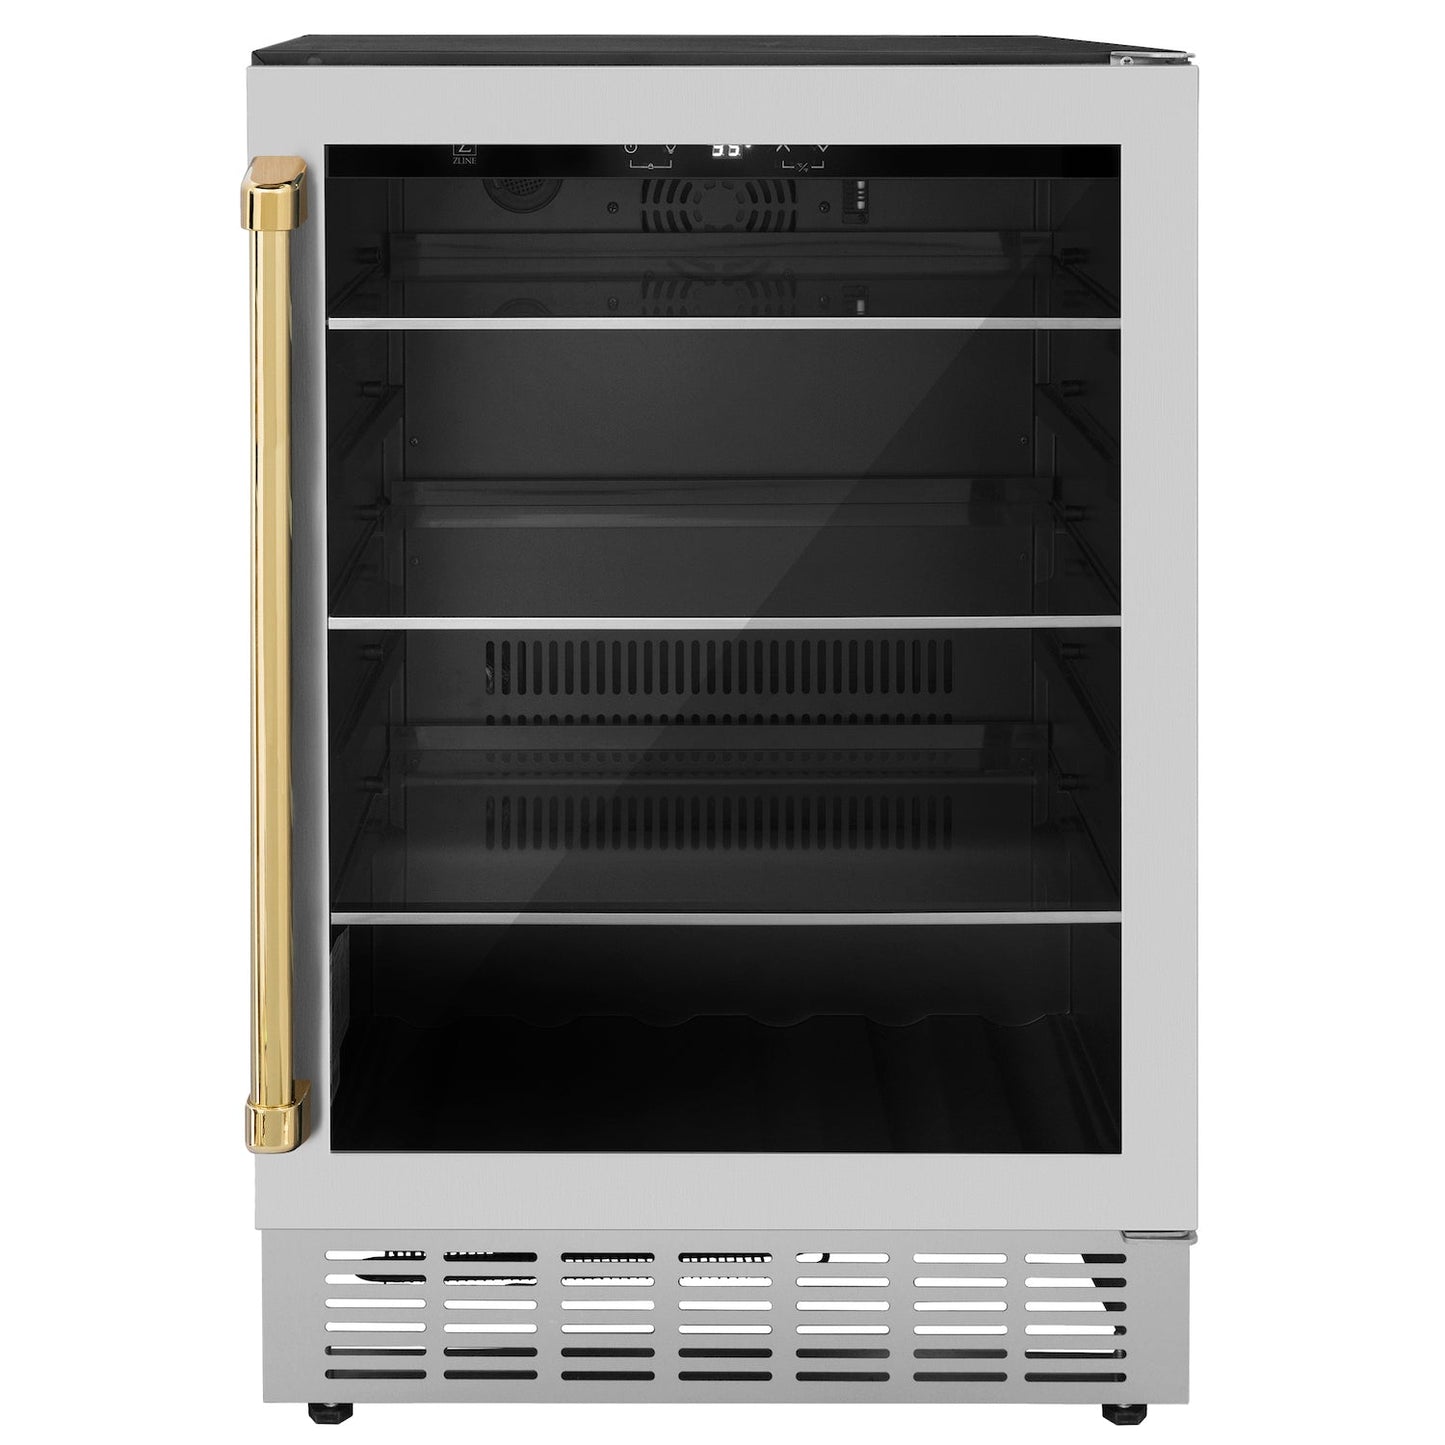 ZLINE Autograph Edition Kitchen Package with 24 in. Wine Cooler and 24 in. Beverage Fridge with Gold Accents (2AKP-RBV-RWV-G)